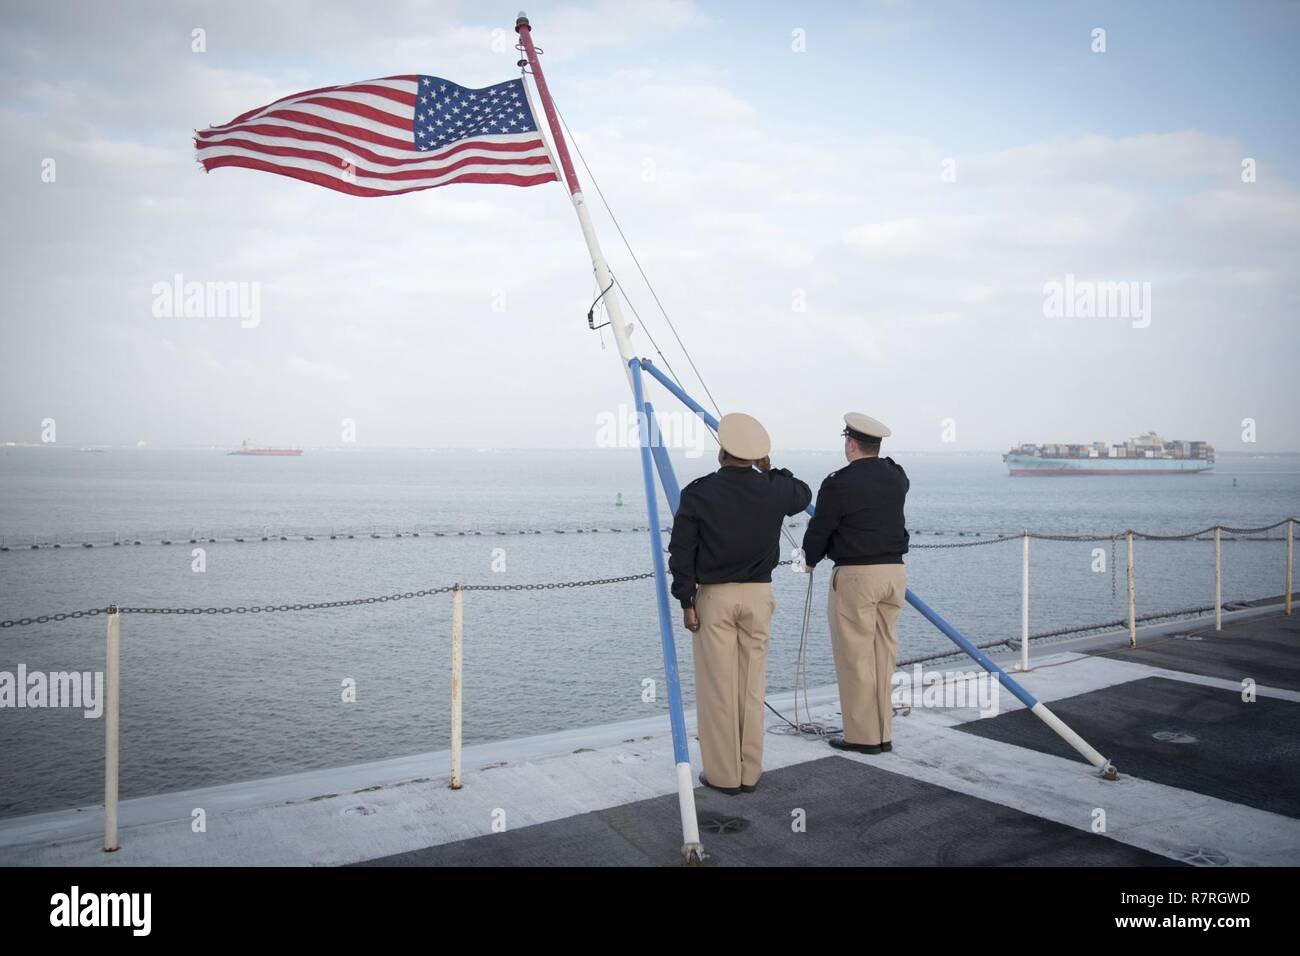 NORFOLK, Va. (March 29, 2017) Chief Aviation Boatswain's Mate (Handling) Charles Branch and Chief Sonar Technician (Surface) Matthew J. Massetti salute the ensign during morning colors on the flight deck of aircraft carrier USS Dwight D. Eisenhower (CVN 69) (Ike). Ike is currently pier side during the sustainment phase of the Optimized Fleet Response Plan (OFRP). Stock Photo